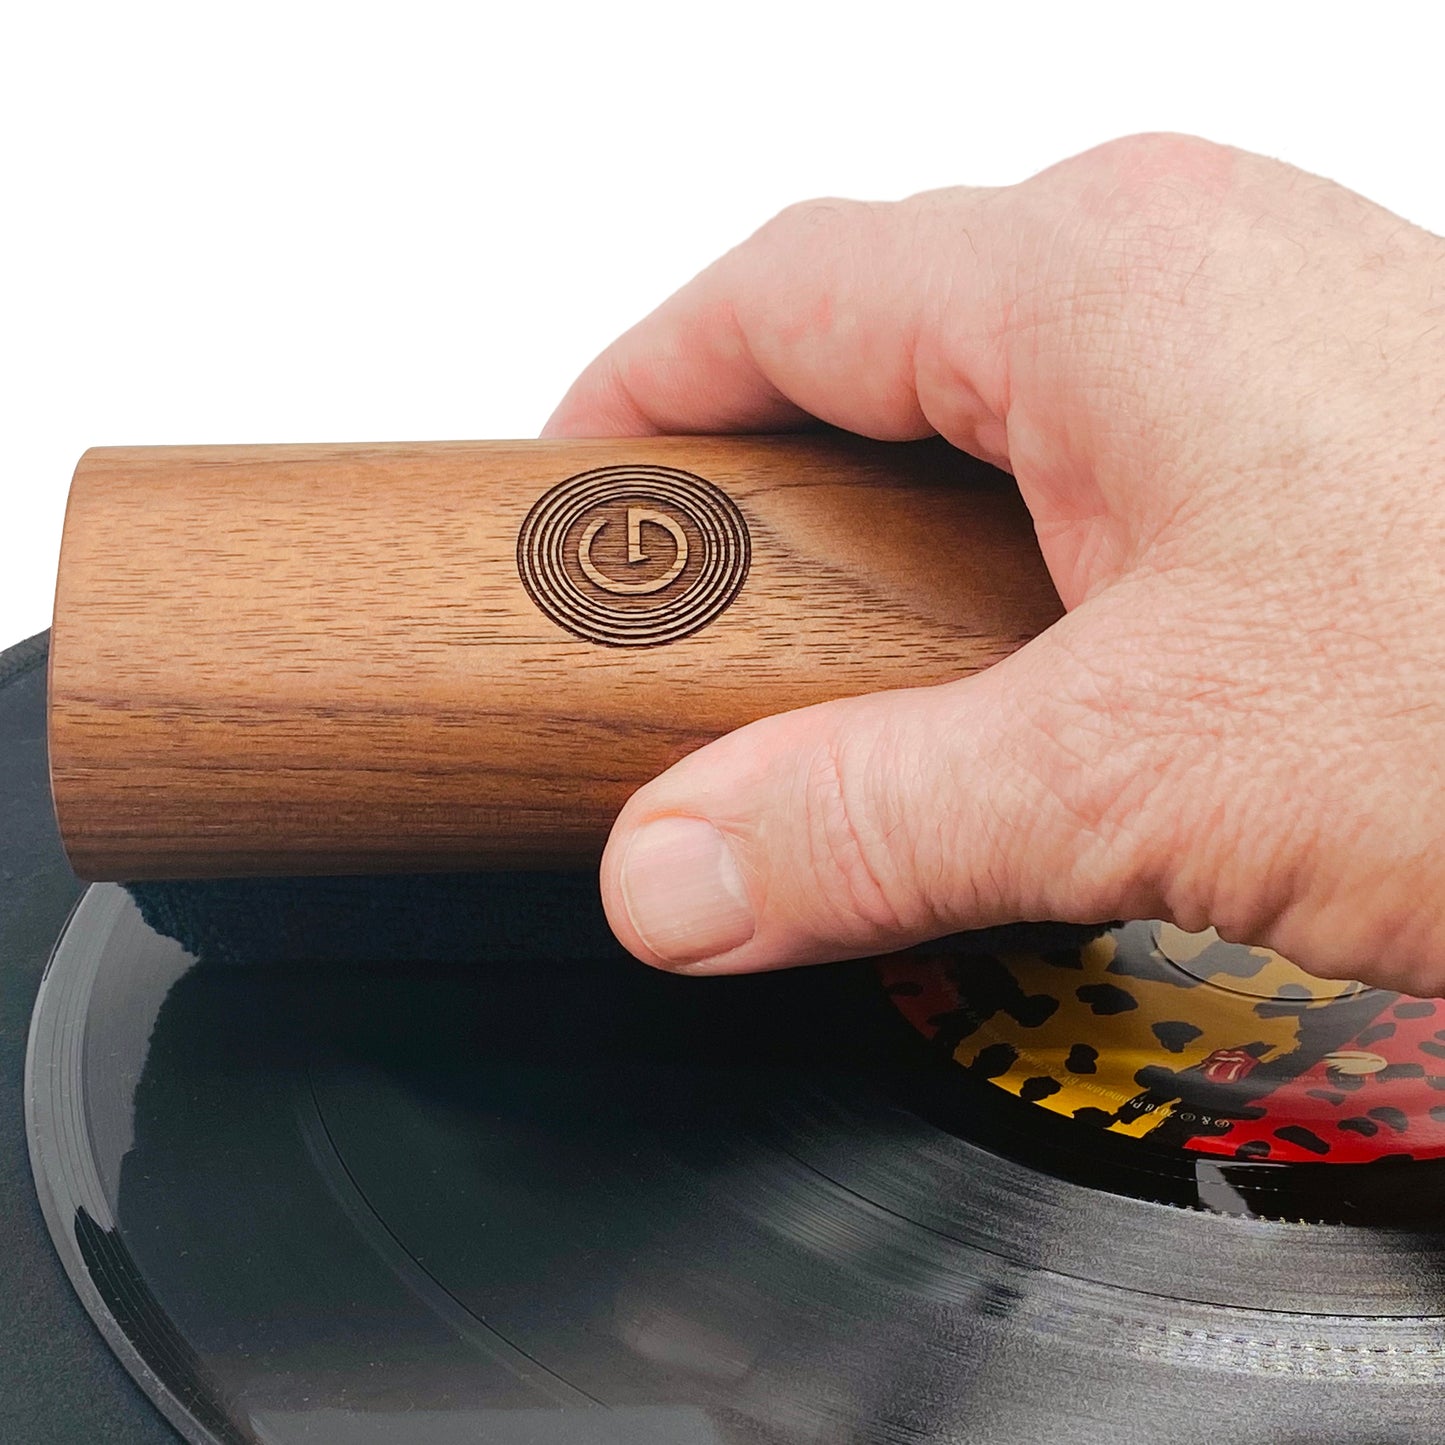 GrooveWasher Vinyl Record Cleaning Kit – Handcrafted Walnut Handle with Scratch-Free Microfiber Pad